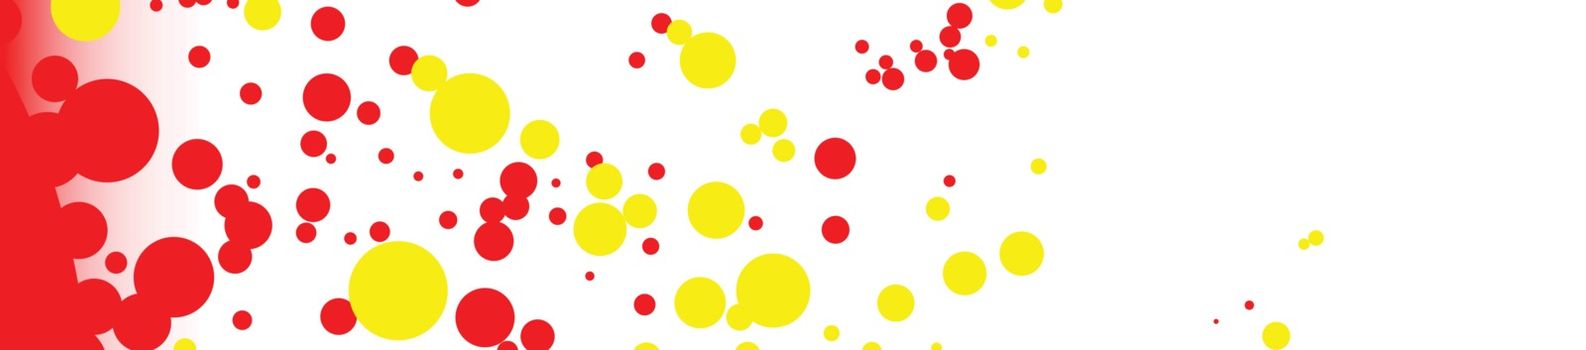 A red and yellow dots splatter web banner background